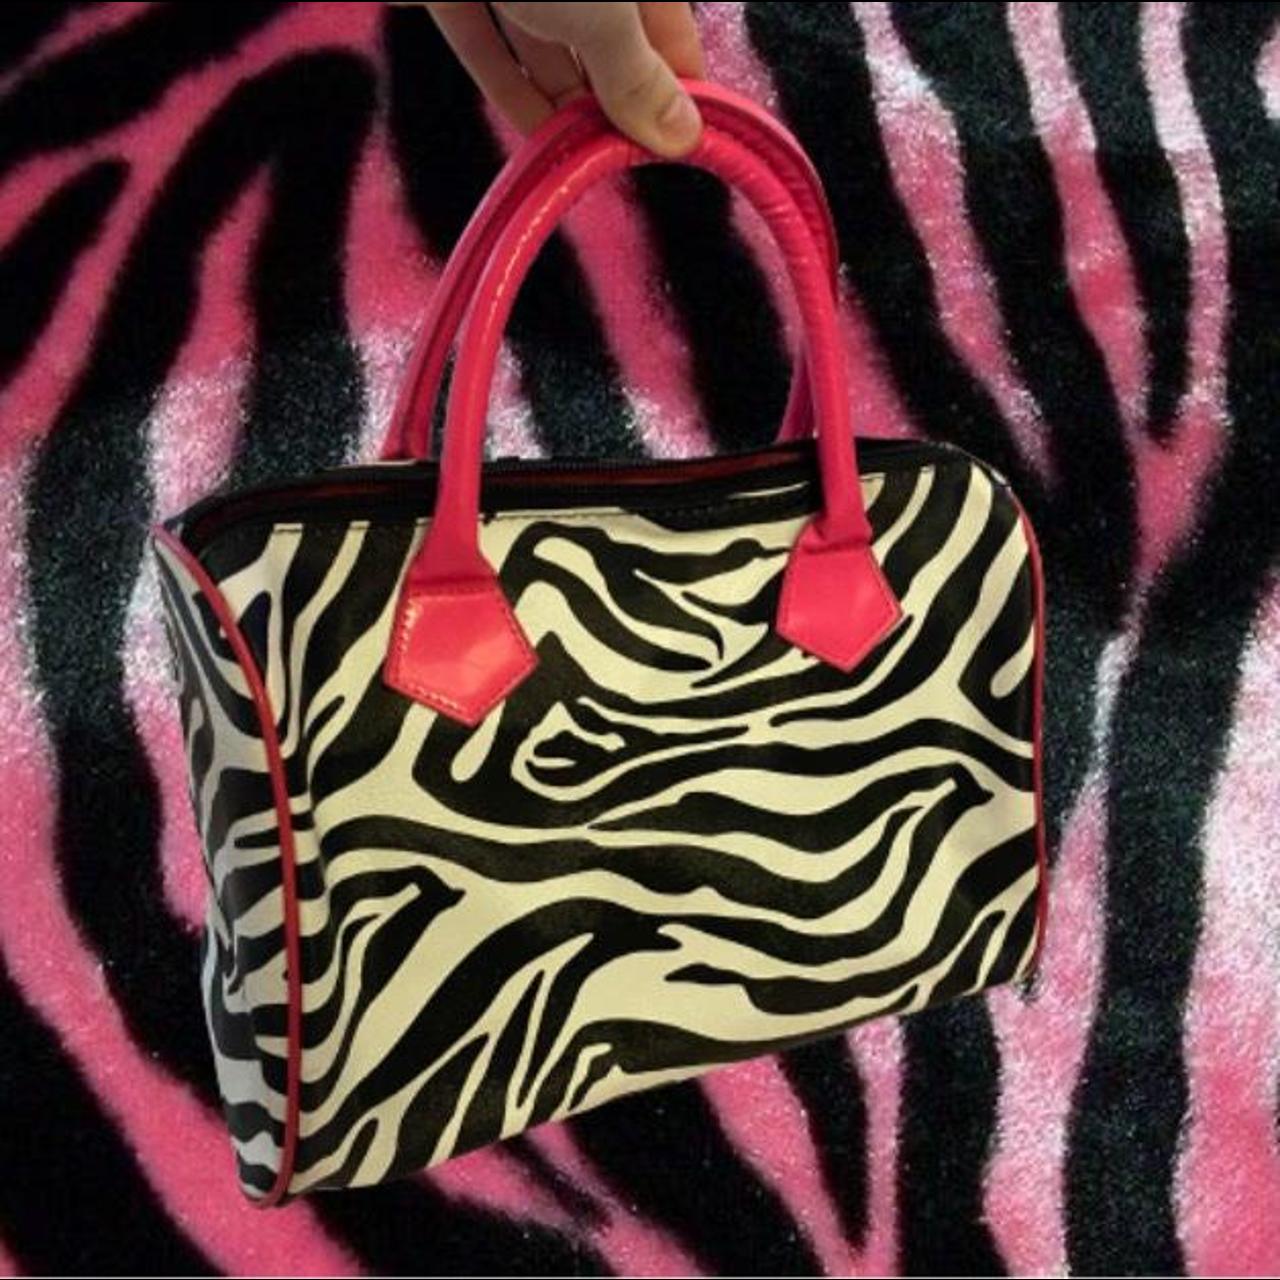 Animal print handbags will bring out your wild side this fall